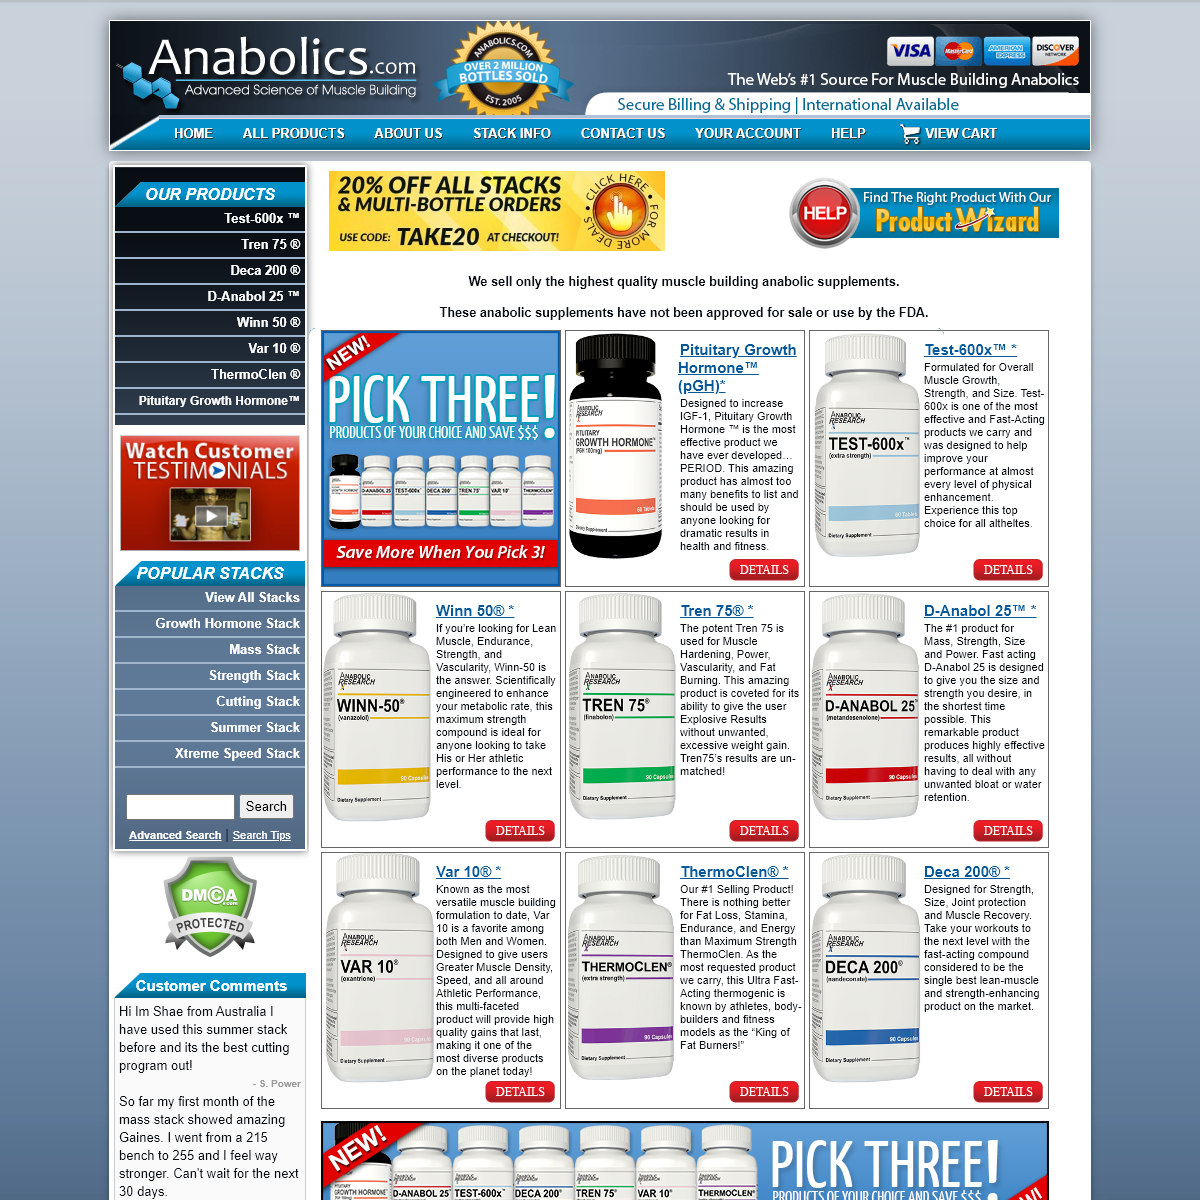 A complete backup of anabolics.com